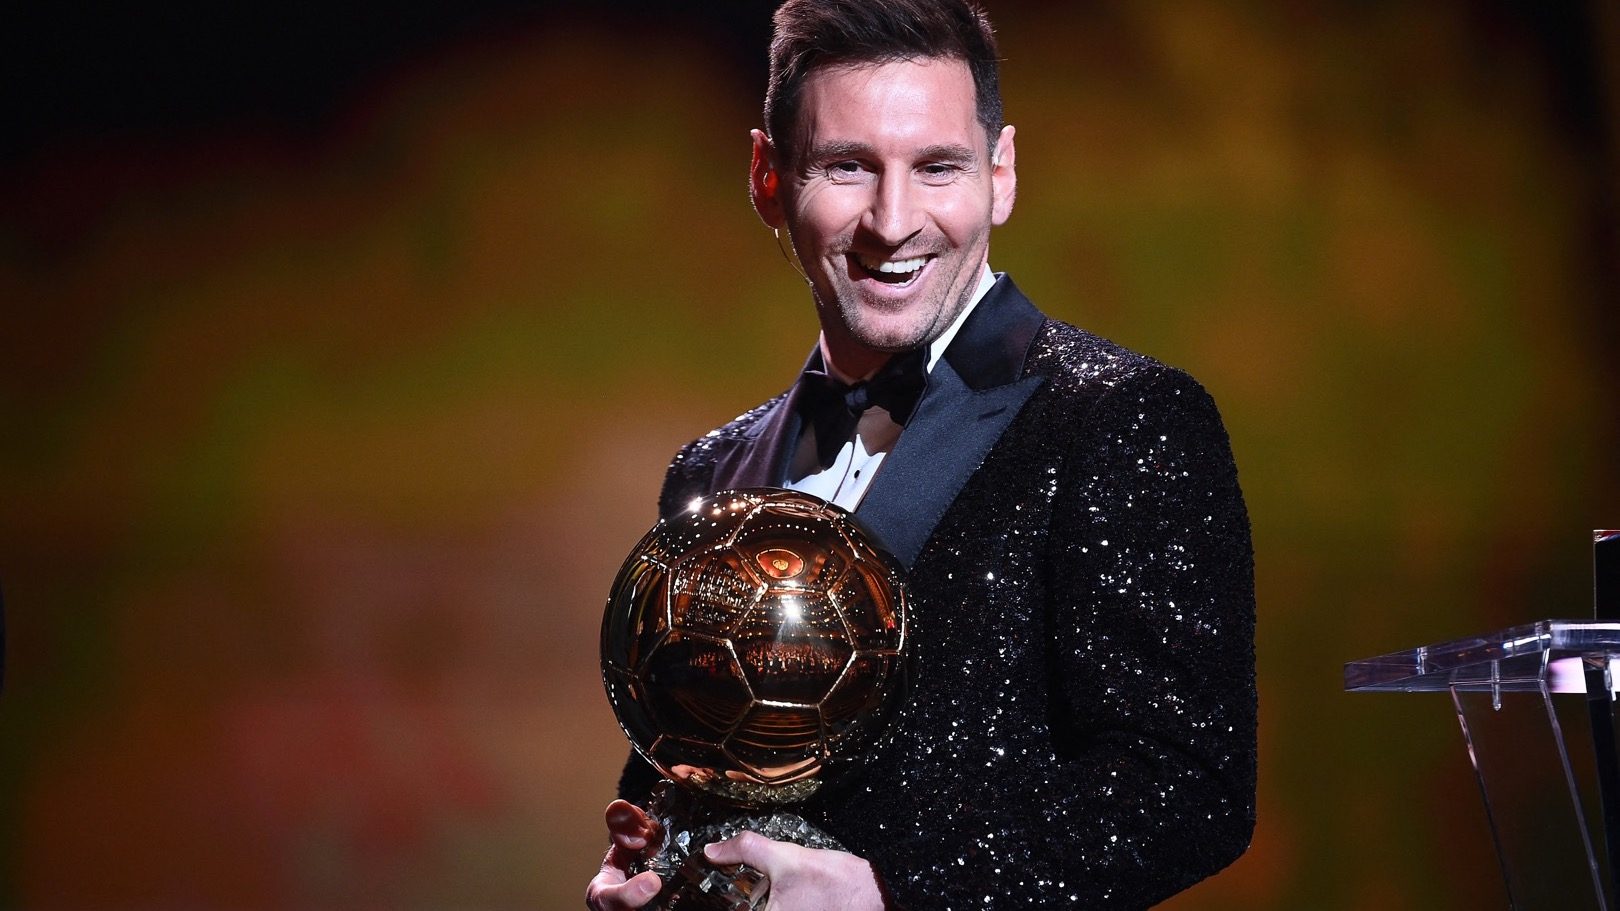 Ballon d'Or's recognition as most prestigious award rooted in its history